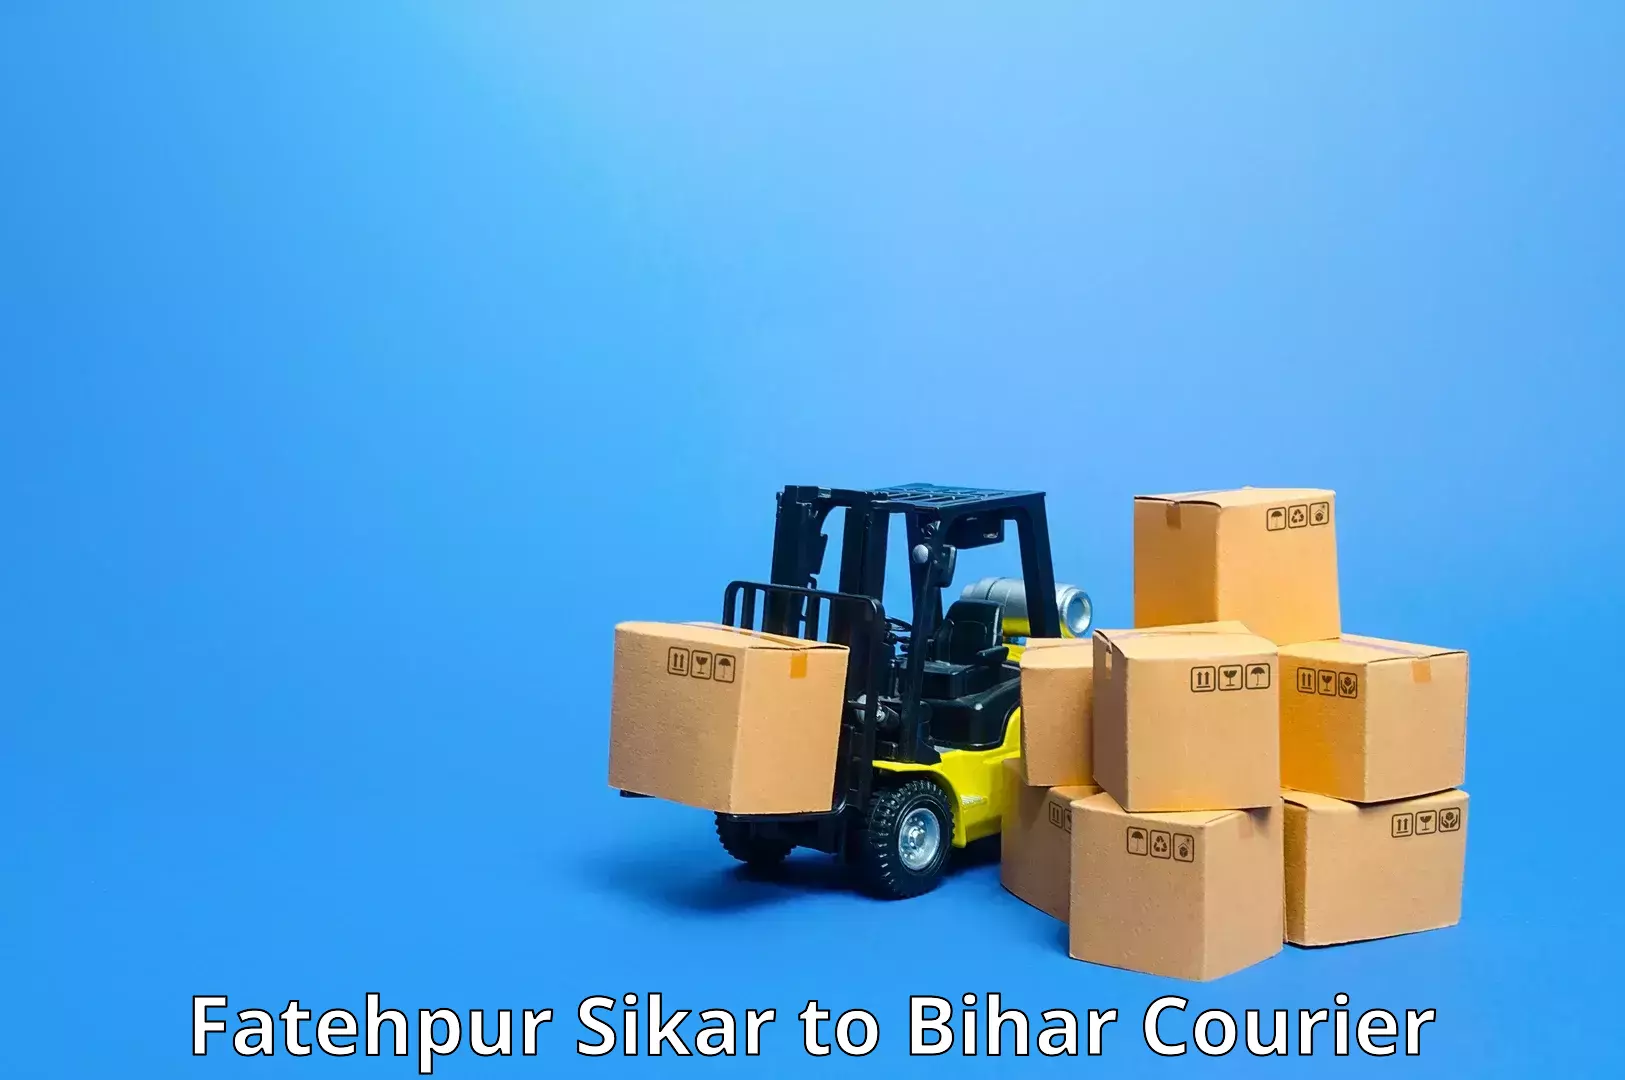 Same day shipping Fatehpur Sikar to Fatwah